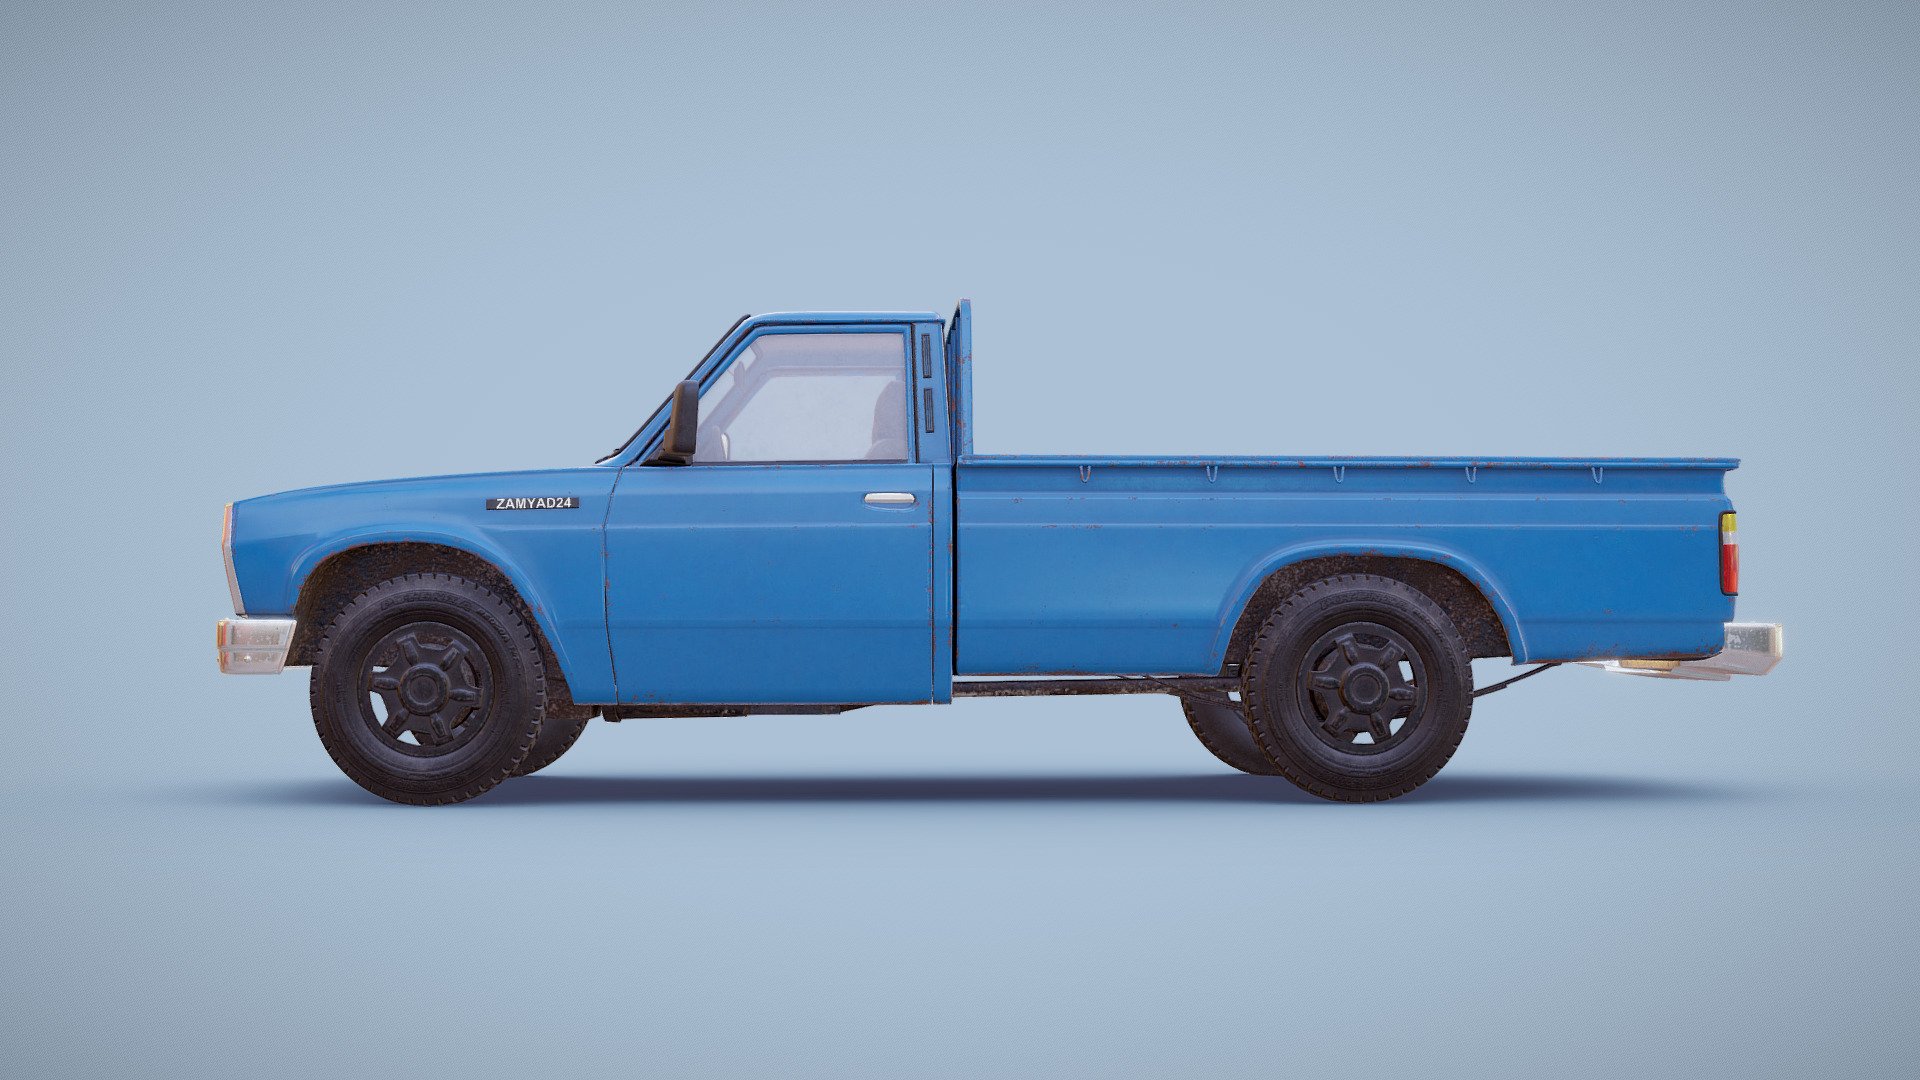 Blue pick-up truck. Work in progress

Model is created by uncredited person, i did full unwrap and texture painting (still in WIP). If you know model author's name, please contact me, so i could give proper credit to him 3d model